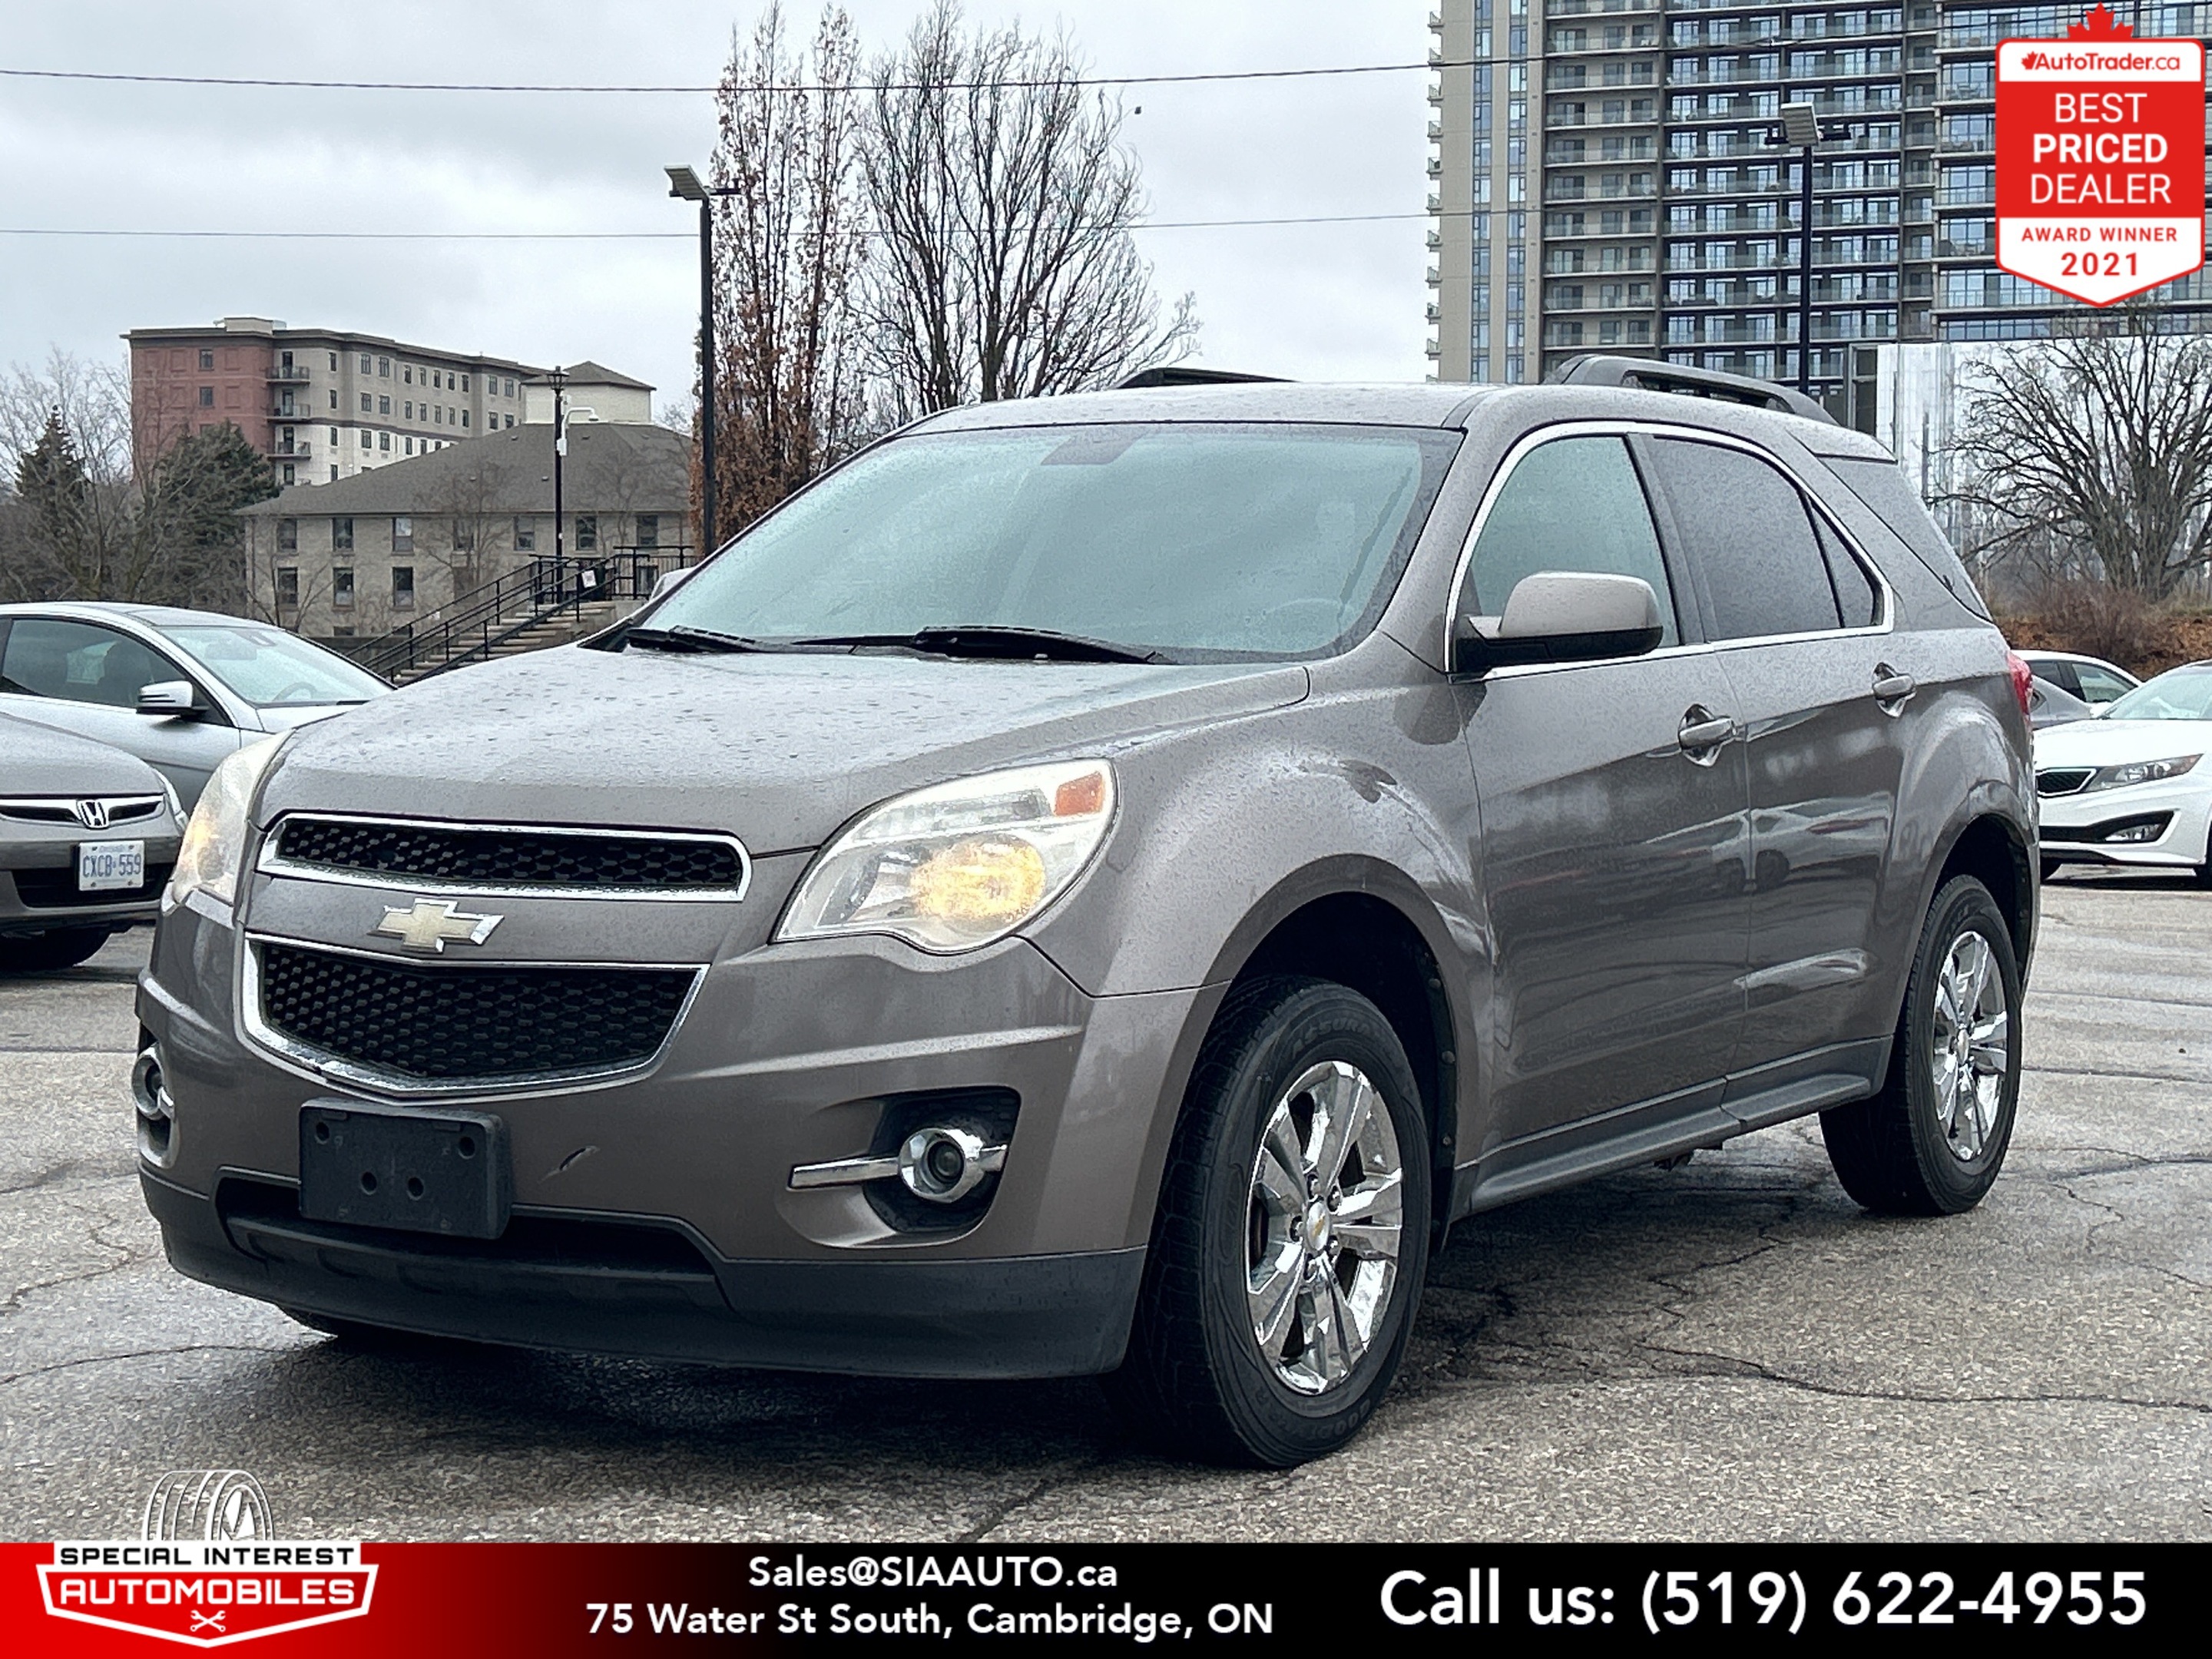 2010 Chevrolet Equinox FWD 1LT * Heated Seats * AS-IS * Air Conditioning